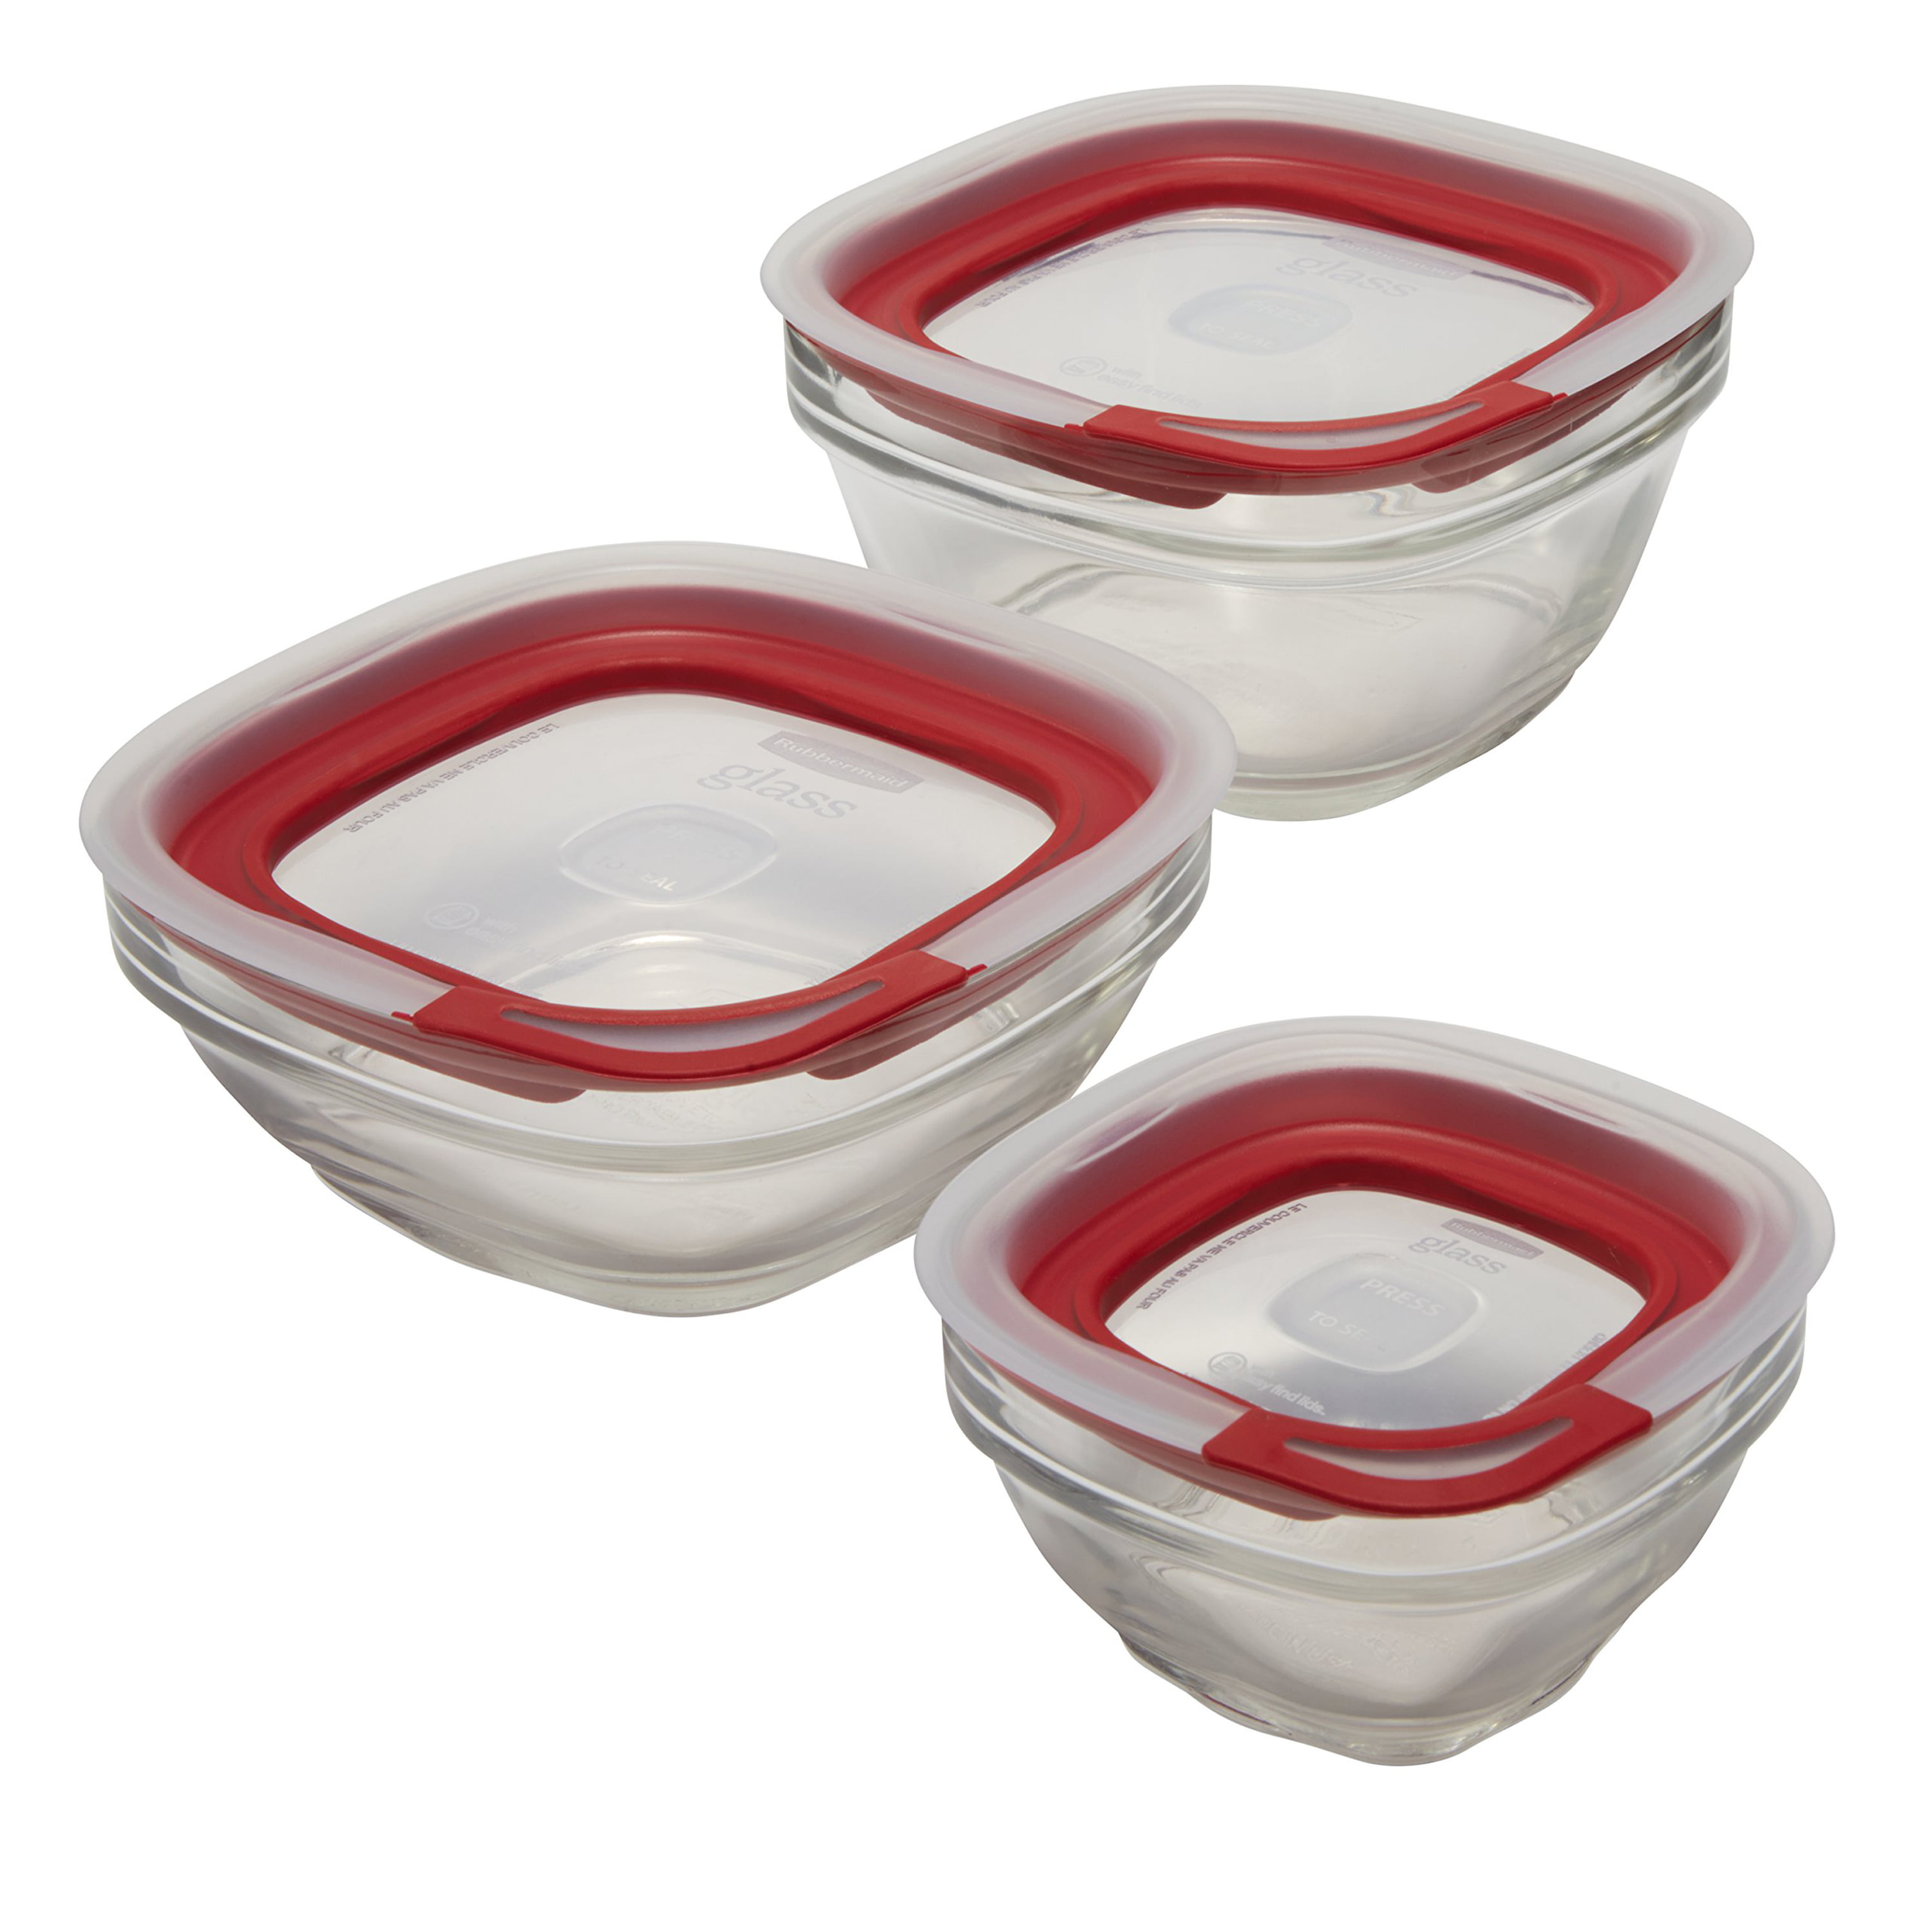 Rubbermaid® 1777165 Easy Find Lids™ Food Storage Container Set, 6